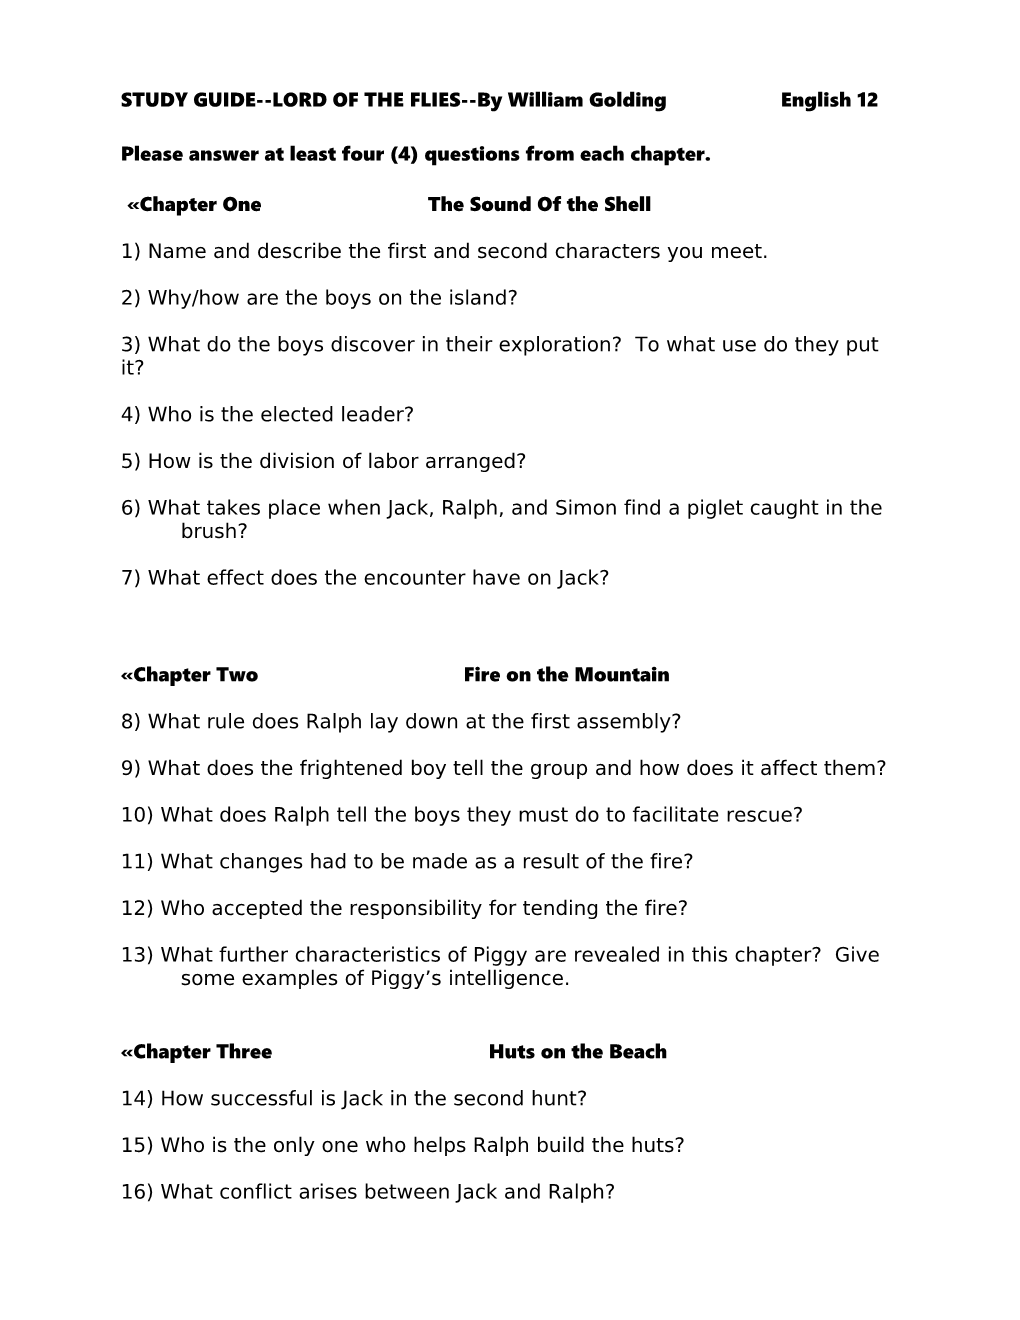 Lord of the Flies Study Guide 07-08